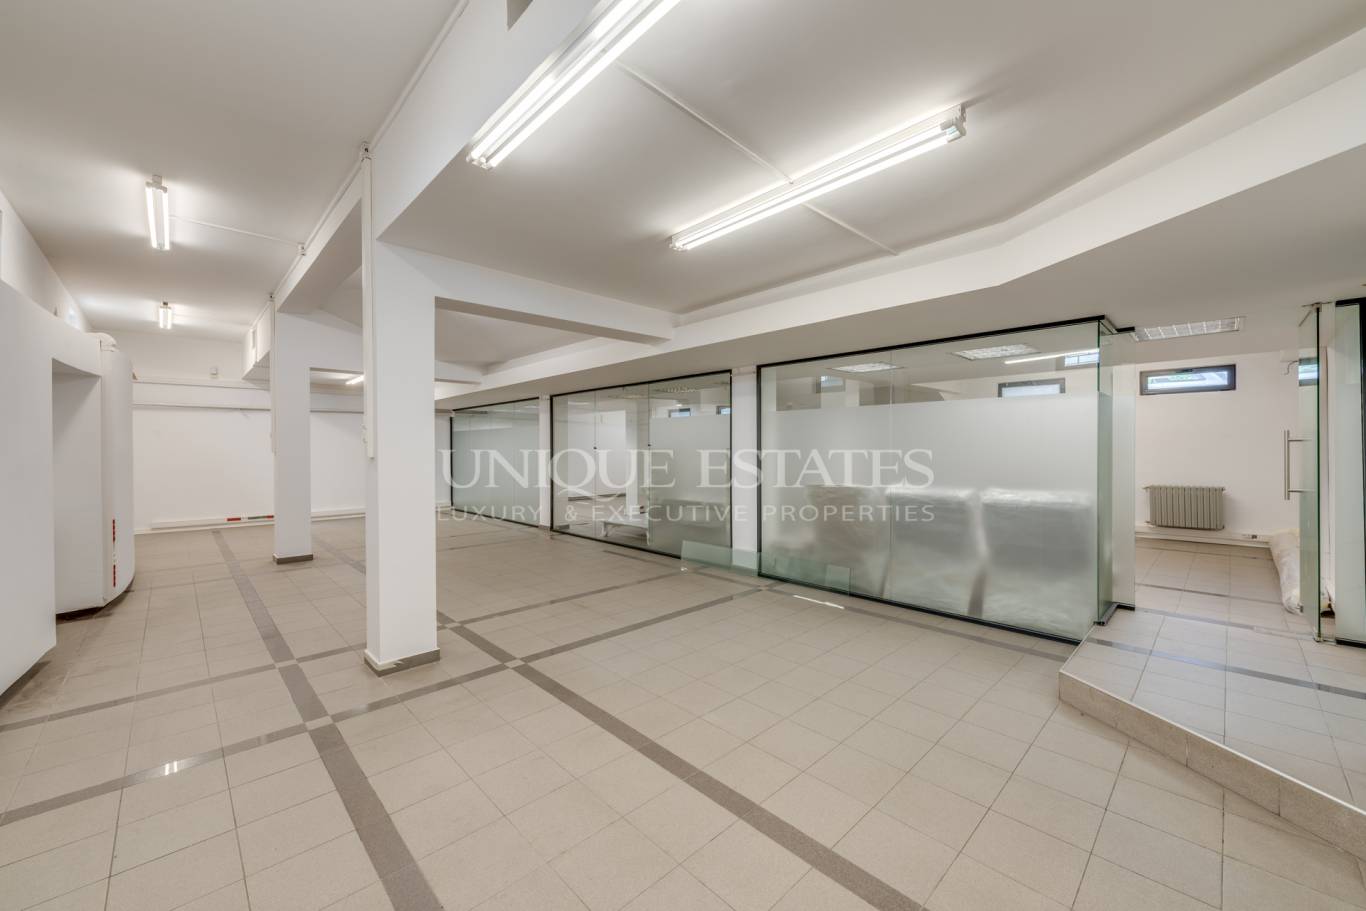 Office for rent in Sofia, Drujba 2 with listing ID: K13284 - image 6